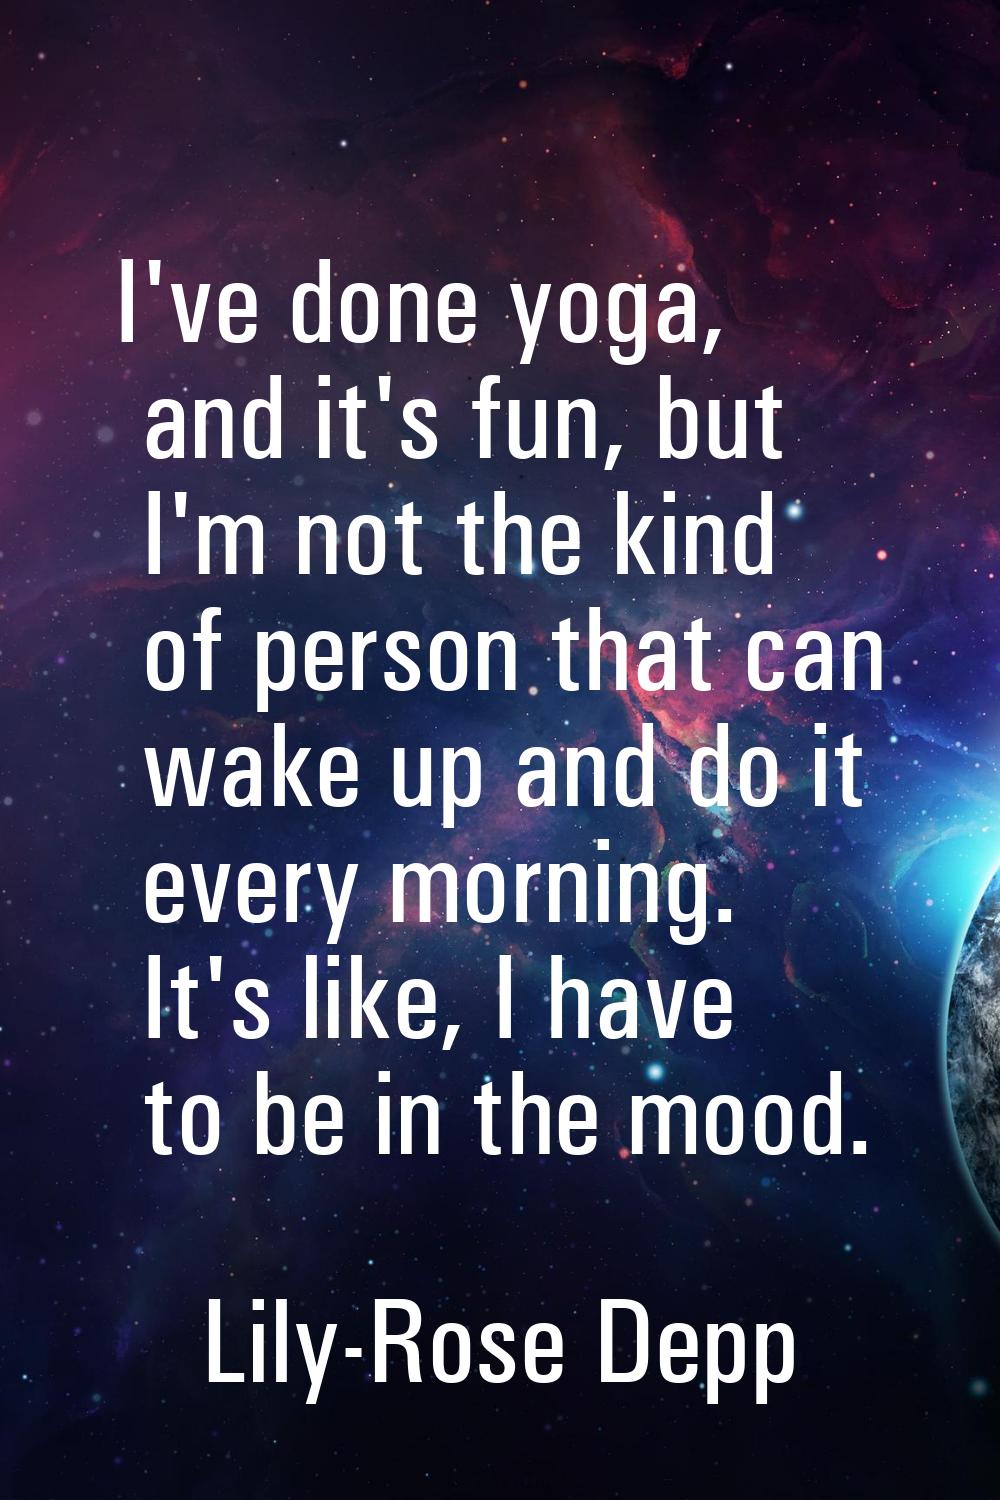 I've done yoga, and it's fun, but I'm not the kind of person that can wake up and do it every morni